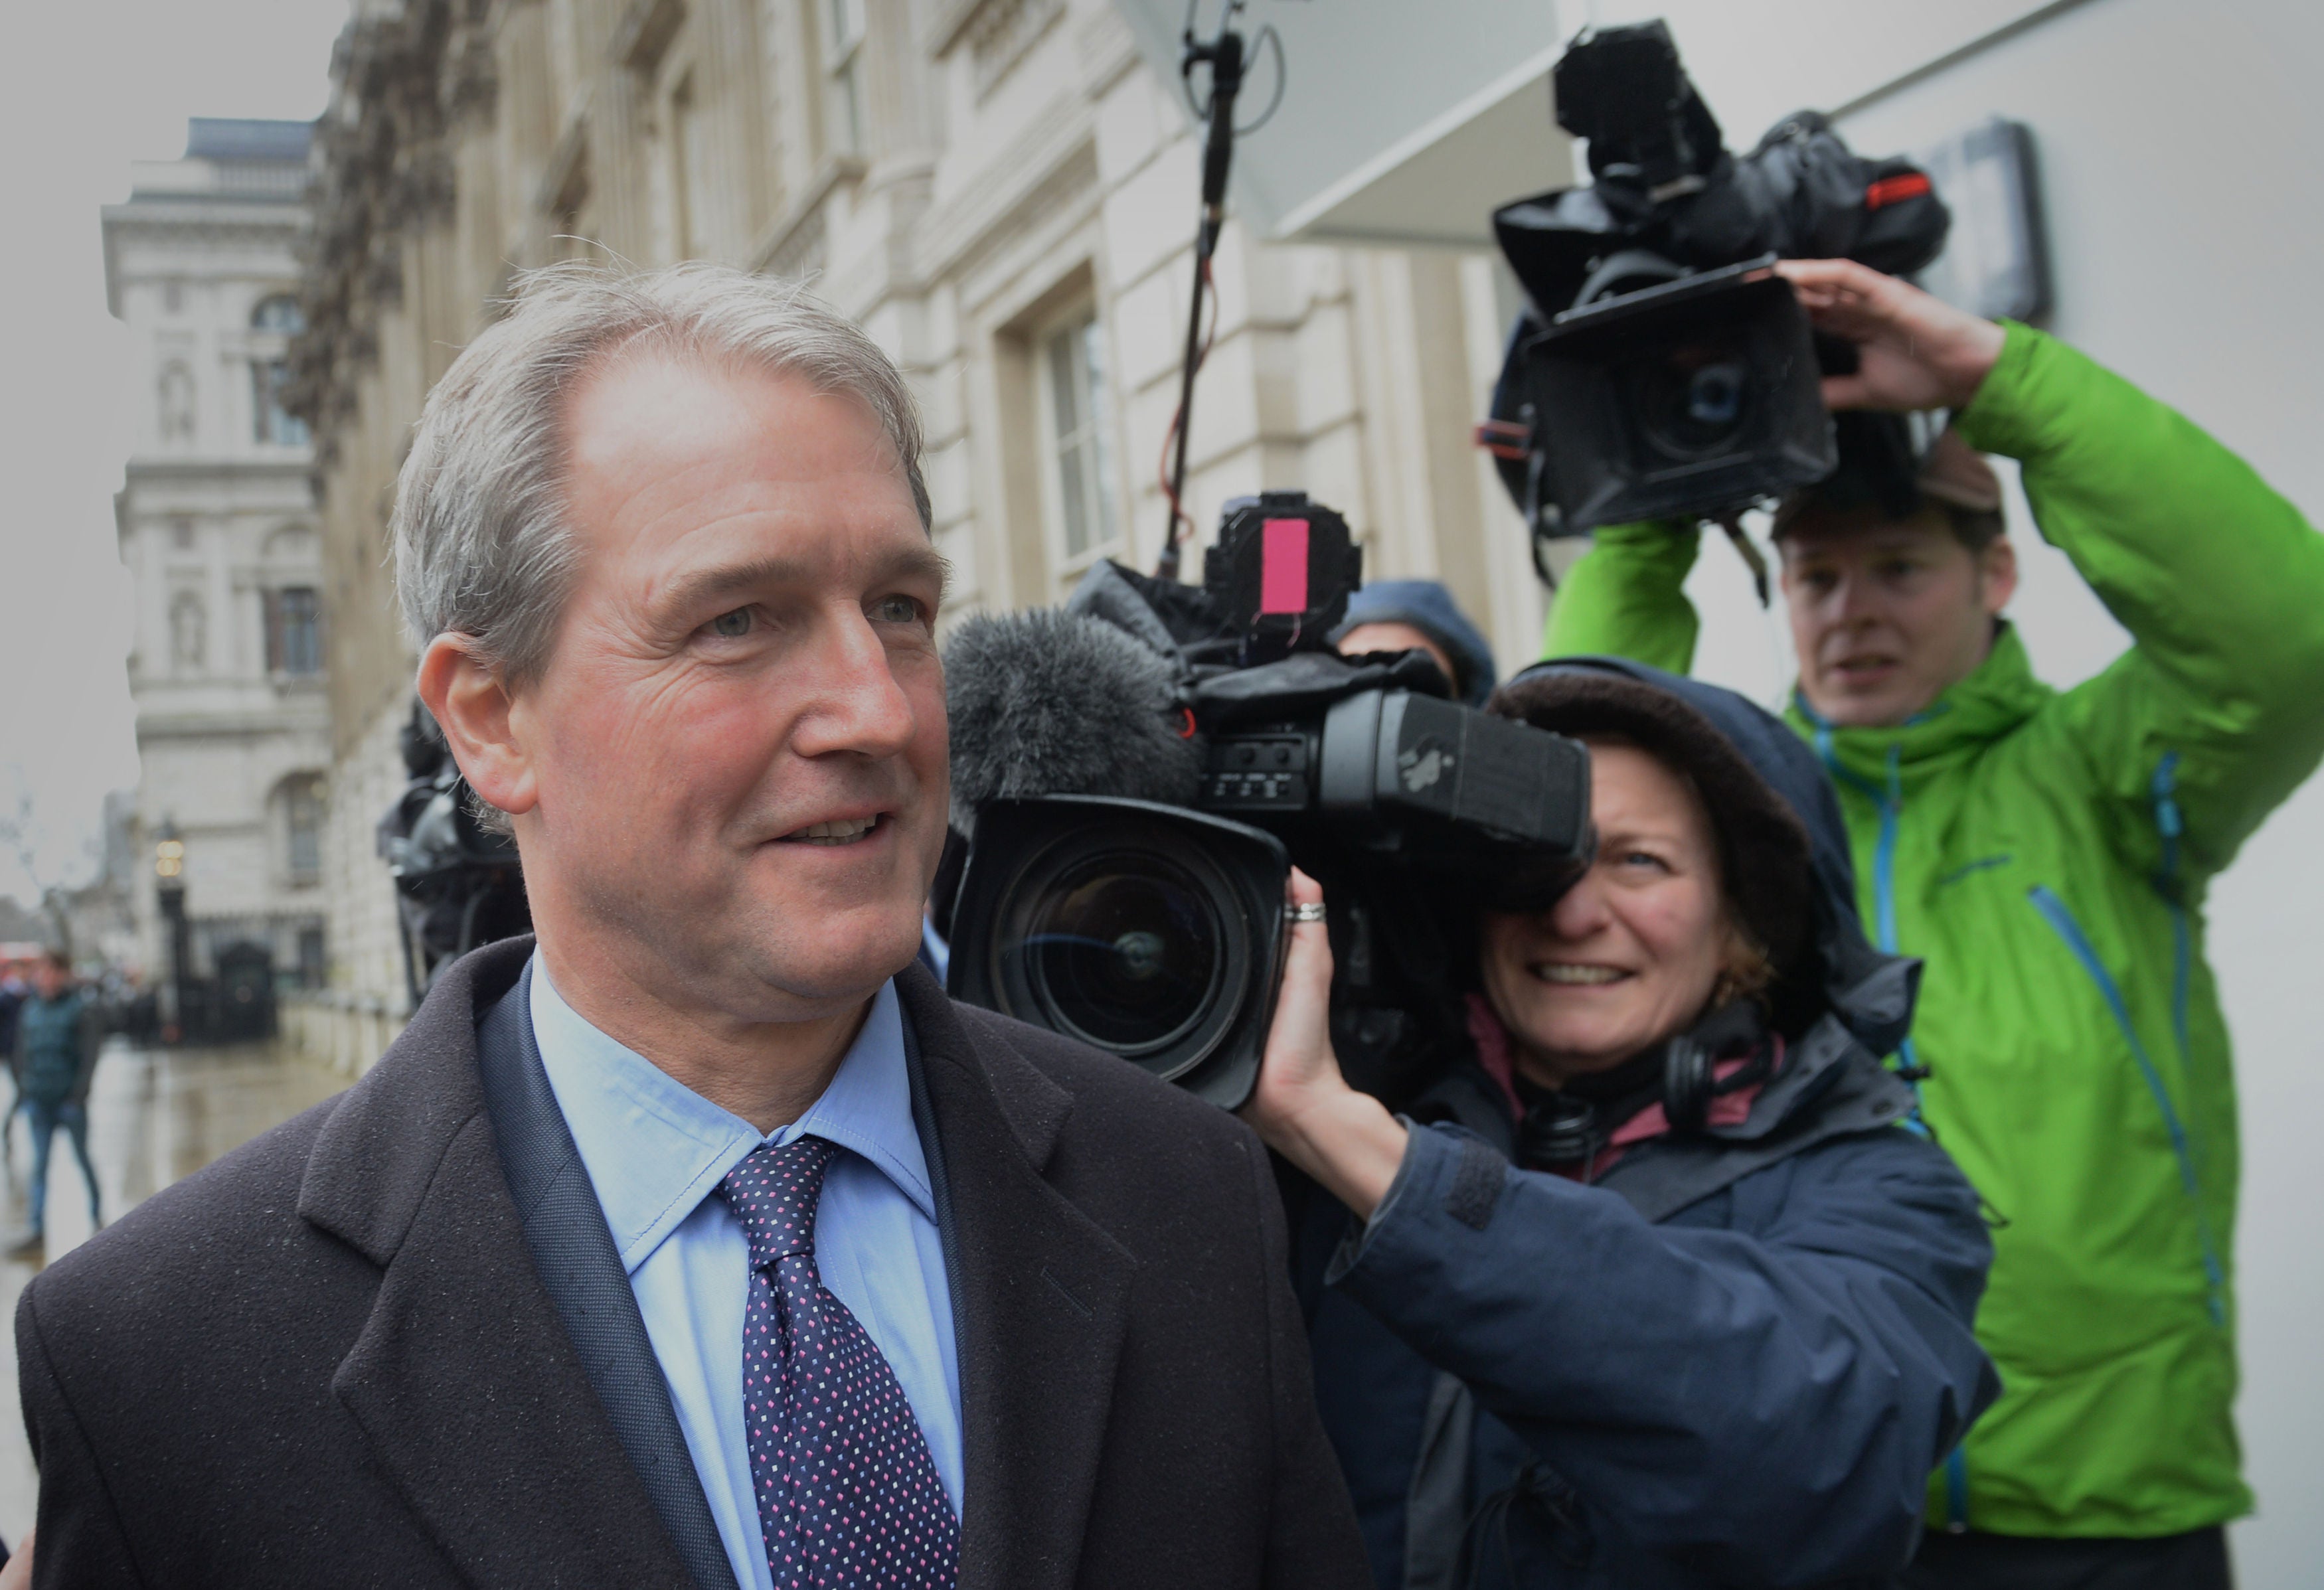 Conservative MP Owen Paterson resigned as an MP after the scandal (Stefan Roussea/PA)